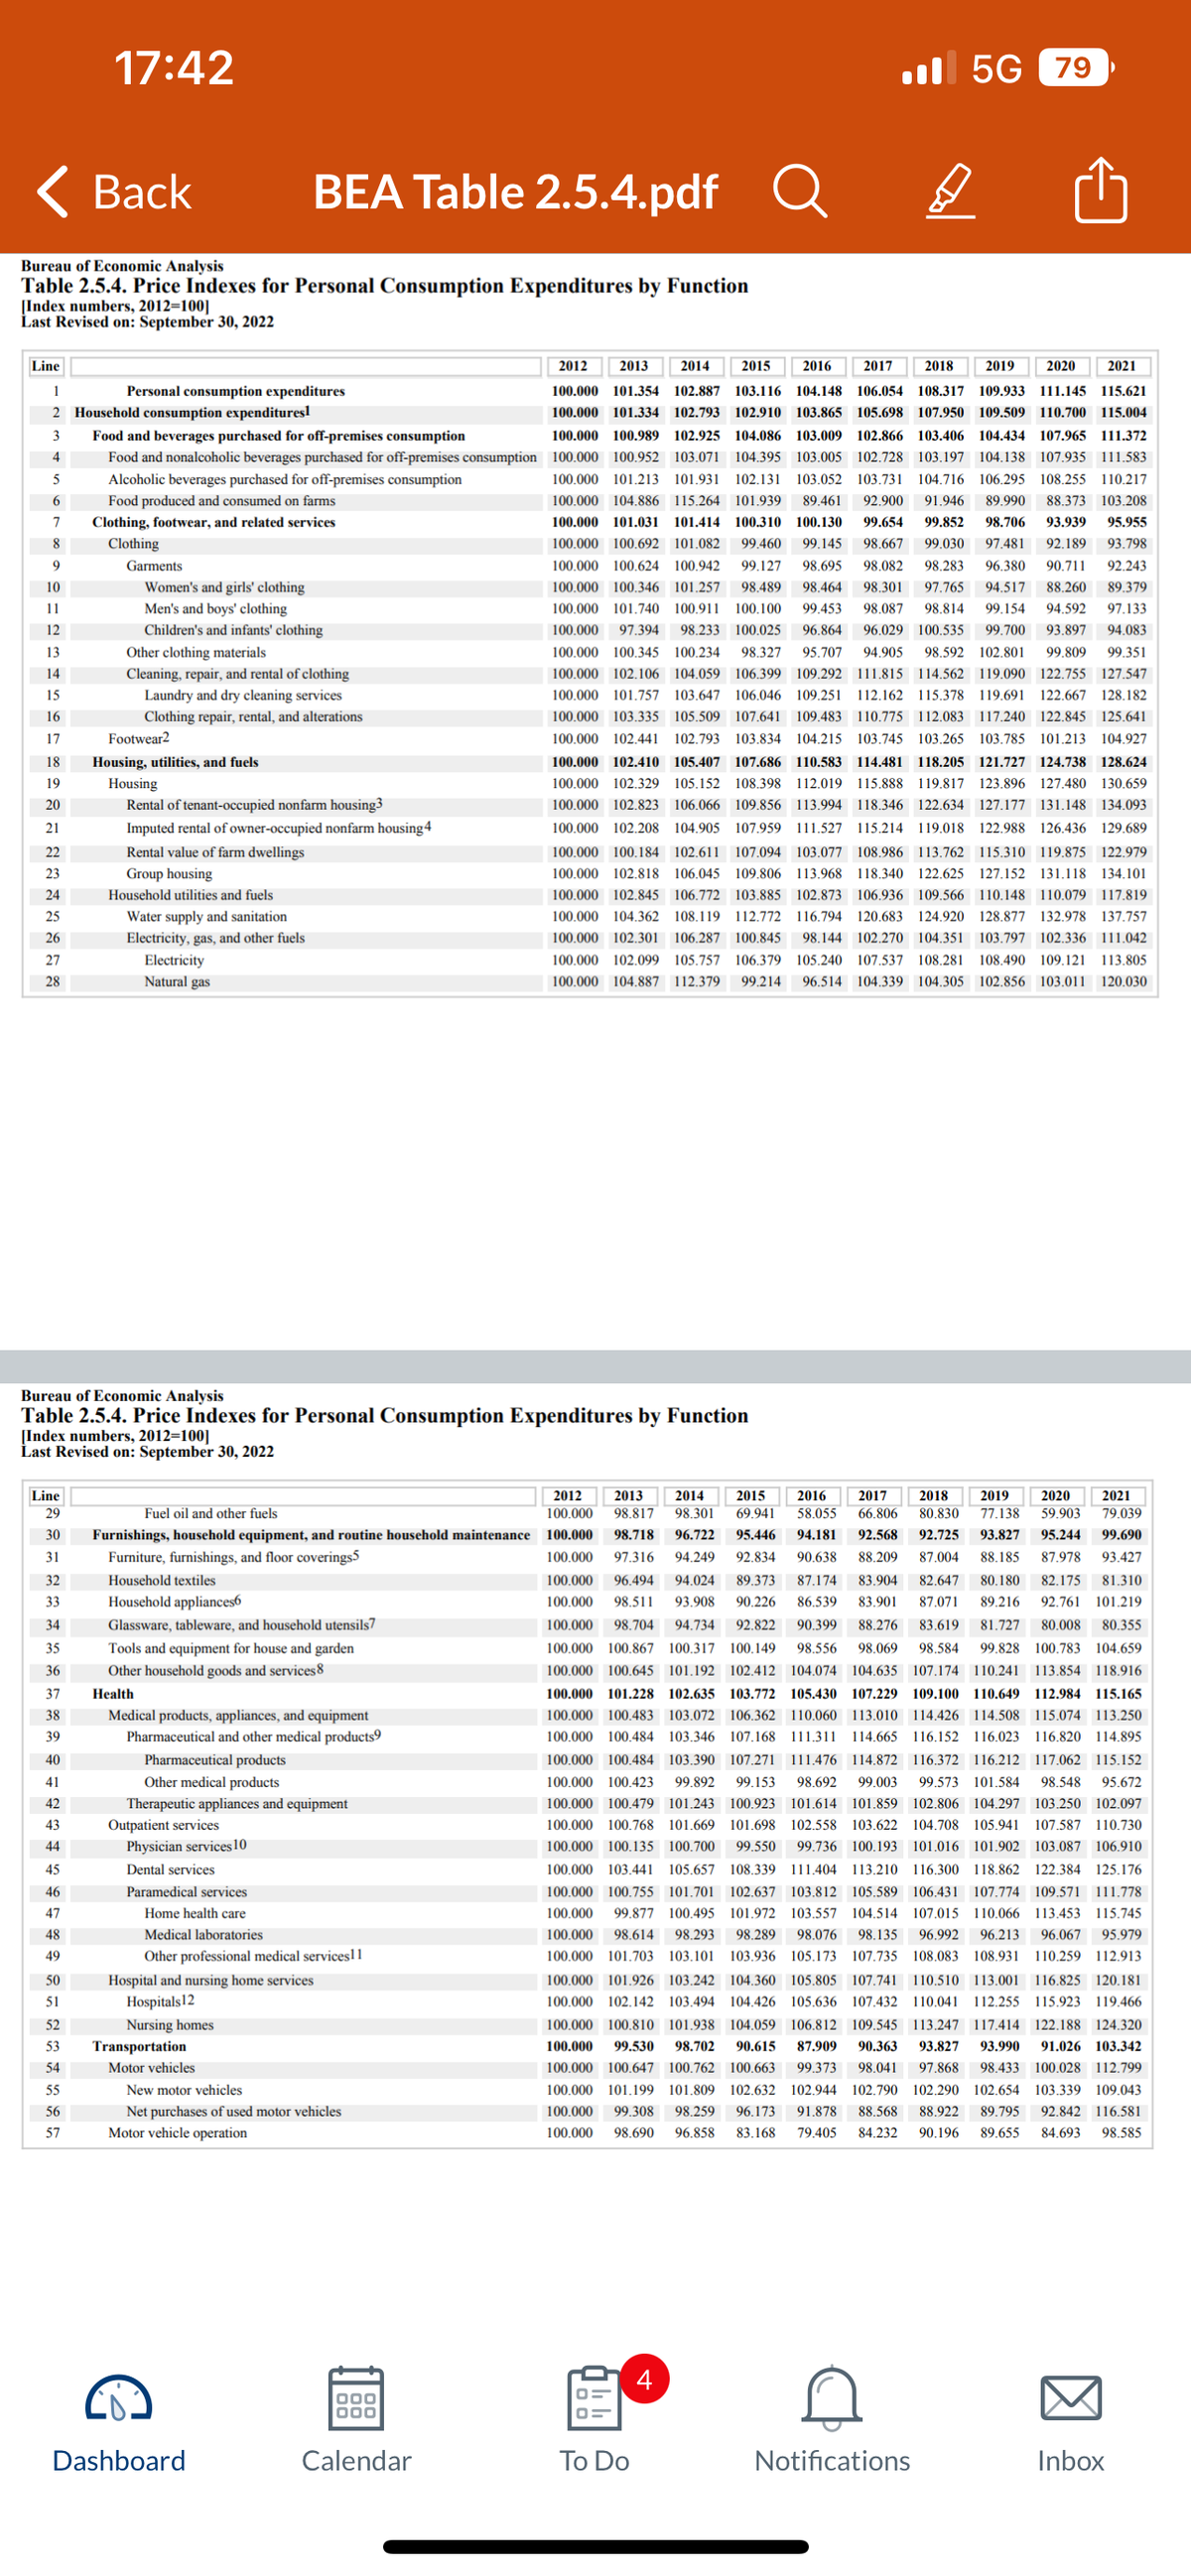 BEA Table 2.5.4.pdf
Bureau of Economic Analysis
Table 2.5.4. Price Indexes for Personal Consumption Expenditures by Function
[Index numbers, 2012=100]
Last Revised on: September 30, 2022
6
Line
1
2 Household consumption expenditures
3
Food and beverages purchased for off-premises consumption
Food and nonalcoholic beverages purchased for off-premises consumption
4
5
Alcoholic beverages purchased for off-premises consumption
Food produced and consumed on farms
Clothing, footwear, and related services
Clothing
7
8
9
10
11
12
13
14
15
16
17
18
19
20
21
22
23
24
25
26
27
28
Line
29
30
31
32
33
34
35
36
37
38
39
17:42
40
41
42
43
44
45
46
47
48
49
Back
50
51
52
53
54
55
56
57
Personal consumption expenditures
Garments
Women's and girls' clothing
Men's and boys' clothing
Children's and infants' clothing
Other clothing materials
Cleaning, repair, and rental of clothing
Laundry and dry cleaning services
Clothing repair, rental, and alterations
Bureau of Economic Analysis
Table 2.5.4. Price Indexes for Personal Consumption Expenditures by Function
[Index numbers, 2012=100]
Last Revised on: September 30, 2022
Footwear2
Housing, utilities, and fuels
Housing
Rental of tenant-occupied nonfarm housing3
Imputed rental of owner-occupied nonfarm housing 4
Rental value of farm dwellings
Group housing
Household utilities and fuels
Water supply and sanitation
Electricity, gas, and other fuels
Electricity
Natural gas
Household textiles
Household appliances6
Glassware, tableware, and household utensils7
Fuel oil and other fuels
Furnishings, household equipment, and routine household maintenance 100.000
Furniture, furnishings, and floor coverings5
Tools and equipment for house and garden
Other household goods and services 8
Health
Medical products, appliances, and equipment
Pharmaceutical and other medical products9
Pharmaceutical products
Other medical products
Therapeutic appliances and equipment
Outpatient services
Physician services 10
Dental services
Paramedical services
Home health care
Medical laboratories
Other professional medical services11
Hospital and nursing home services
Hospitals 12
Nursing homes
Transportation
Motor vehicles
New motor vehicles
Net purchases of used motor vehicles
Motor vehicle operation
Dashboard
Calendar
2016
2017 2018
2019
92.243
89.379
2012 2013 2014 2015
2020 2021
100.000 101.354 102.887 103.116 104.148 106.054 108.317 109.933 111.145 115.621
100.000 101.334 102.793 102.910 103.865 105.698 107.950 109.509 110.700 115.004
100.000 100.989 102.925 104.086
103.009 102.866 103.406 104.434 107.965 111.372
100.000 100.952 103.071 104.395 103.005 102.728 103.197 104.138 107.935 111.583
100.000 101.213 101.931 102.131 103.052 103.731 104.716 106.295 108.255 110.217
100.000 104.886 115.264 101.939 89.461 92.900 91.946 89.990 88.373 103.208
100.000 101.031 101.414 100.310 100.130 99.654 99.852 98.706 93.939 95.955
100.000 100.692 101.082 99.460 99.145 98.667 99.030 97.481 92.189
93.798
100.000 100.624 100.942 99.127 98.695 98,082 98.283 96.380
90.711
100.000 100.346 101.257 98.489 98.464 98.301 97.765 94.517 88.260
100.000 101.740 100.911 100.100
99.453 98.087 98.814 99.154 94.592 97.133
100.000 97.394 98.233 100.025 96.864 96.029 100.535 99.700 93.897 94.083
100.000 100.345 100.234 98.327 95.707 94.905 98.592 102.801 99.809 99.351
100.000 102.106 104.059 106.399 109.292 111.815 114.562 119.090 122.755 127.547
100.000 101.757 103.647 106.046 109.251 112.162 115.378 119.691 122.667 128.182
100.000 103.335 105.509 107.641 109.483 110.775 112.083 117.240 122.845 125.641
100.000 102.441 102.793 103.834 104.215 103.745 103.265 103.785 101.213 104.927
100.000 102.410 105.407 107.686 110.583 114.481 118.205 121.727 124.738 128.624
100.000 102.329 105.152 108.398 112.019 115.888 119.817 123.896 127.480 130.659
100.000 102.823 106.066 109.856 113.994 118.346 122.634 127.177 131.148 134.093
100.000 102.208 104.905 107.959 111.527 115.214 119.018 122.988 126.436 129.689
100.000 100.184 102.611 107.094 103.077 108.986 113.762 115.310 119.875 122.979
100.000 102.818 106.045 109.806 113.968 118.340 122.625 127.152 131.118 134.101
100.000 102.845 106.772 103.885 102.873 106.936 109.566 110.148 110.079 117.819
100.000 104.362 108.119 112.772 116.794 120.683 124.920 128.877 132.978 137.757
100.000 102.301 106.287 100.845 98.144 102.270 104.351 103.797 102.336 111.042
100.000 102.099 105.757 106.379 105.240 107.537 108.281 108.490 109.121 113.805
100.000 104.887 112.379 99.214 96.514 104.339 104.305 102.856 103.011 120.030
Q
To Do
2020
2021
2012 2013 2014 2015
2016 2017 2018 2019
100.000 98.817 98.301 69.941 58.055 66.806 80.830 77.138 59.903 79.039
98.718 96.722 95.446 94.181 92.568 92.725 93.827 95.244 99.690
100.000 97.316 94.249 92.834 90.638 88.209 87.004
88.185 87.978 93.427
100.000 96.494 94.024 89.373 87.174 83.904 82.647 80.180 82.175 81.310
100.000 98.511 93.908 90.226 86.539 83.901 87.071 89.216 92.761 101.219
100.000 98.704 94.734 92.822 90.399 88.276 83.619 81.727 80.008 80.355
100.000 100.867 100.317 100.149 98.556 98.069 98.584 99.828 100.783 104.659
100.000 100.645 101.192 102.412 104.074 104.635 107.174 110.241 113.854 118.916
100.000 101.228 102.635 103.772 105.430 107.229 109.100 110.649 112.984 115.165
100.000 100.483 103.072 106.362 110.060 113.010 114.426 114.508 115.074 113.250
100.000 100.484 103.346 107.168 111.311 114.665 116.152 116.023 116.820 114.895
100.000 100.484 103.390 107.271 111.476 114.872 116.372 116.212 117.062 115.152
100.000 100.423 99.892 99.153 98.692 99.003 99.573 101.584 98.548 95.672
100.000 100.479 101.243 100.923 101.614 101.859 102.806 104.297 103.250 102.097
100.000 100.768 101.669 101.698 102.558 103.622 104.708 105.941 107.587 110.730
100.000 100.135 100.700 99.550
99.736 100.193 101.016 101.902 103.087 106.910
100.000 103.441 105.657 108.339 111.404 113.210 116.300 118.862 122.384 125.176
100.000 100.755 101.701 102.637 103.812 105.589 106.431 107.774 109.571 111.778
100.000 99.877 100.495 101.972 103.557 104.514 107.015 110.066 113.453 115.745
100.000 98.614 98.293
98.289
98.076 98.135 96.992 96.213 96.067 95.979
100.000 101.703 103.101 103.936 105.173 107.735 108.083 108.931 110.259 112.913
100.000 101.926 103.242 104.360 105.805 107.741 110.510 113.001 116.825 120.181
100.000 102.142 103.494 104.426 105.636 107.432 110.041 112.255 115.923 119.466
100.000 100.810 101.938 104.059 106.812 109.545 113.247 117.414 122.188 124.320
100.000 99.530 98.702 90.615 87.909 90.363 93.827 93.990 91.026 103.342
100.000 100.647 100.762 100.663 99.373 98,041 97.868 98.433 100.028 112.799
102.654 103.339 109.043
100.000 101.199 101.809 102.632 102.944 102.790 102.290
100.000
99.308 98.259 96.173 91.878 88.568 88.922
100.000 98.690 96.858 83.168 79.405 84.232 90.196
89.795 92.842 116.581
89.655 84.693 98.585
4
5G 79
D
Notifications
Inbox